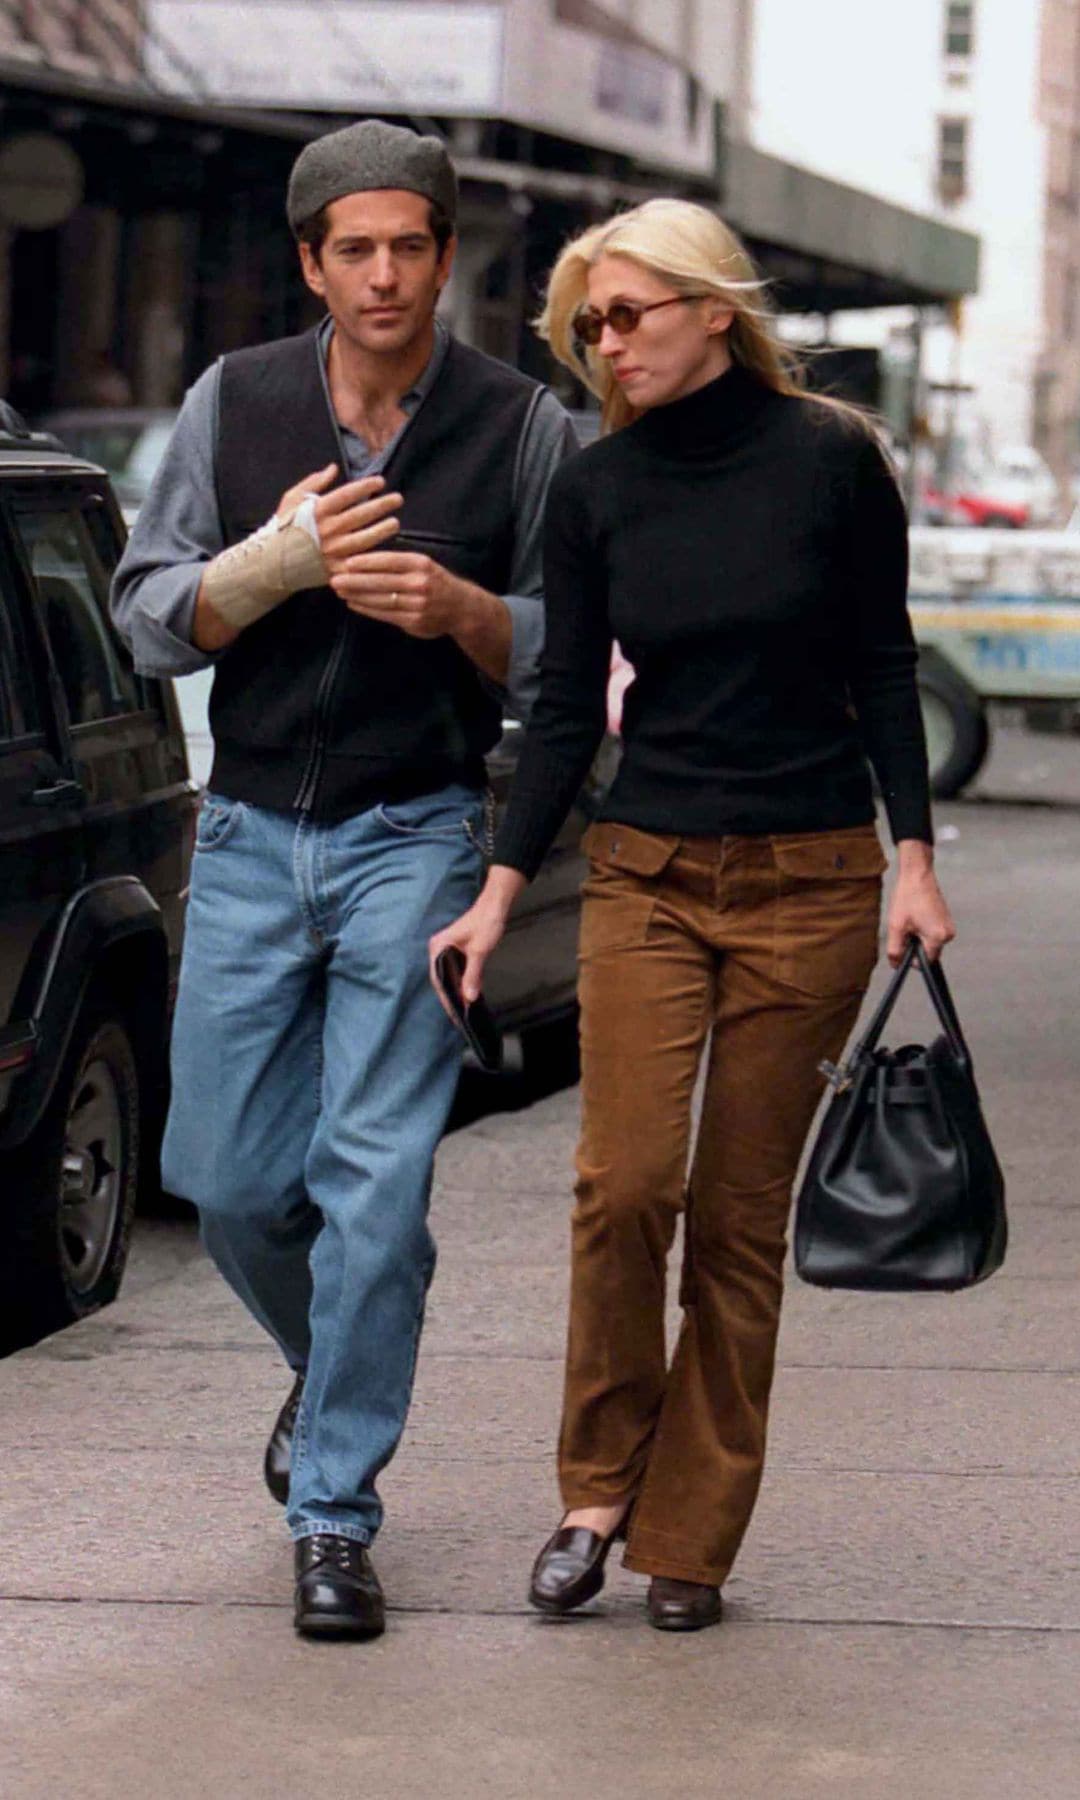 HOLA+ 4174 JOHN F KENNEDY JNR AND CAROLYN BESSETTE IN NYC